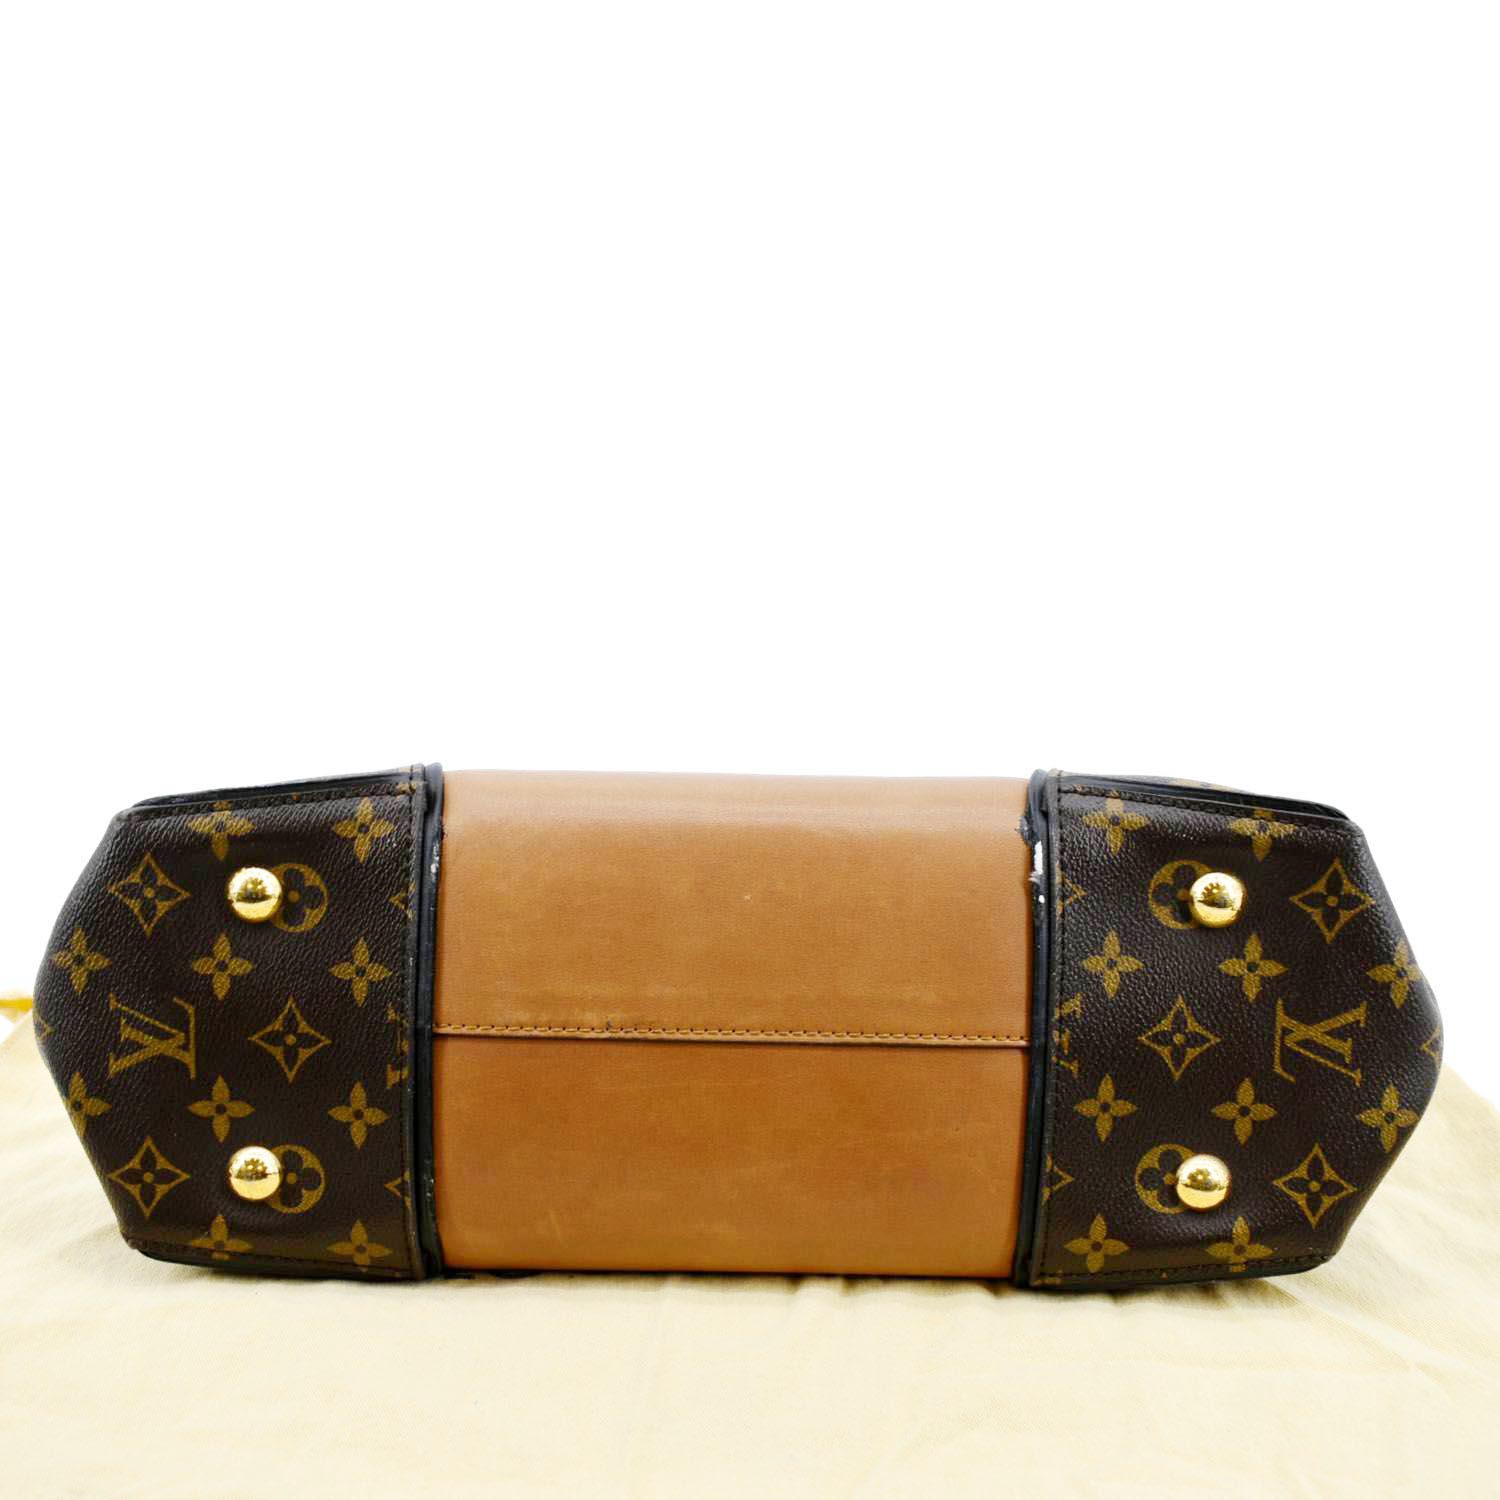 Louis Vuitton W Tote Monogram Canvas and Leather PM at 1stDibs